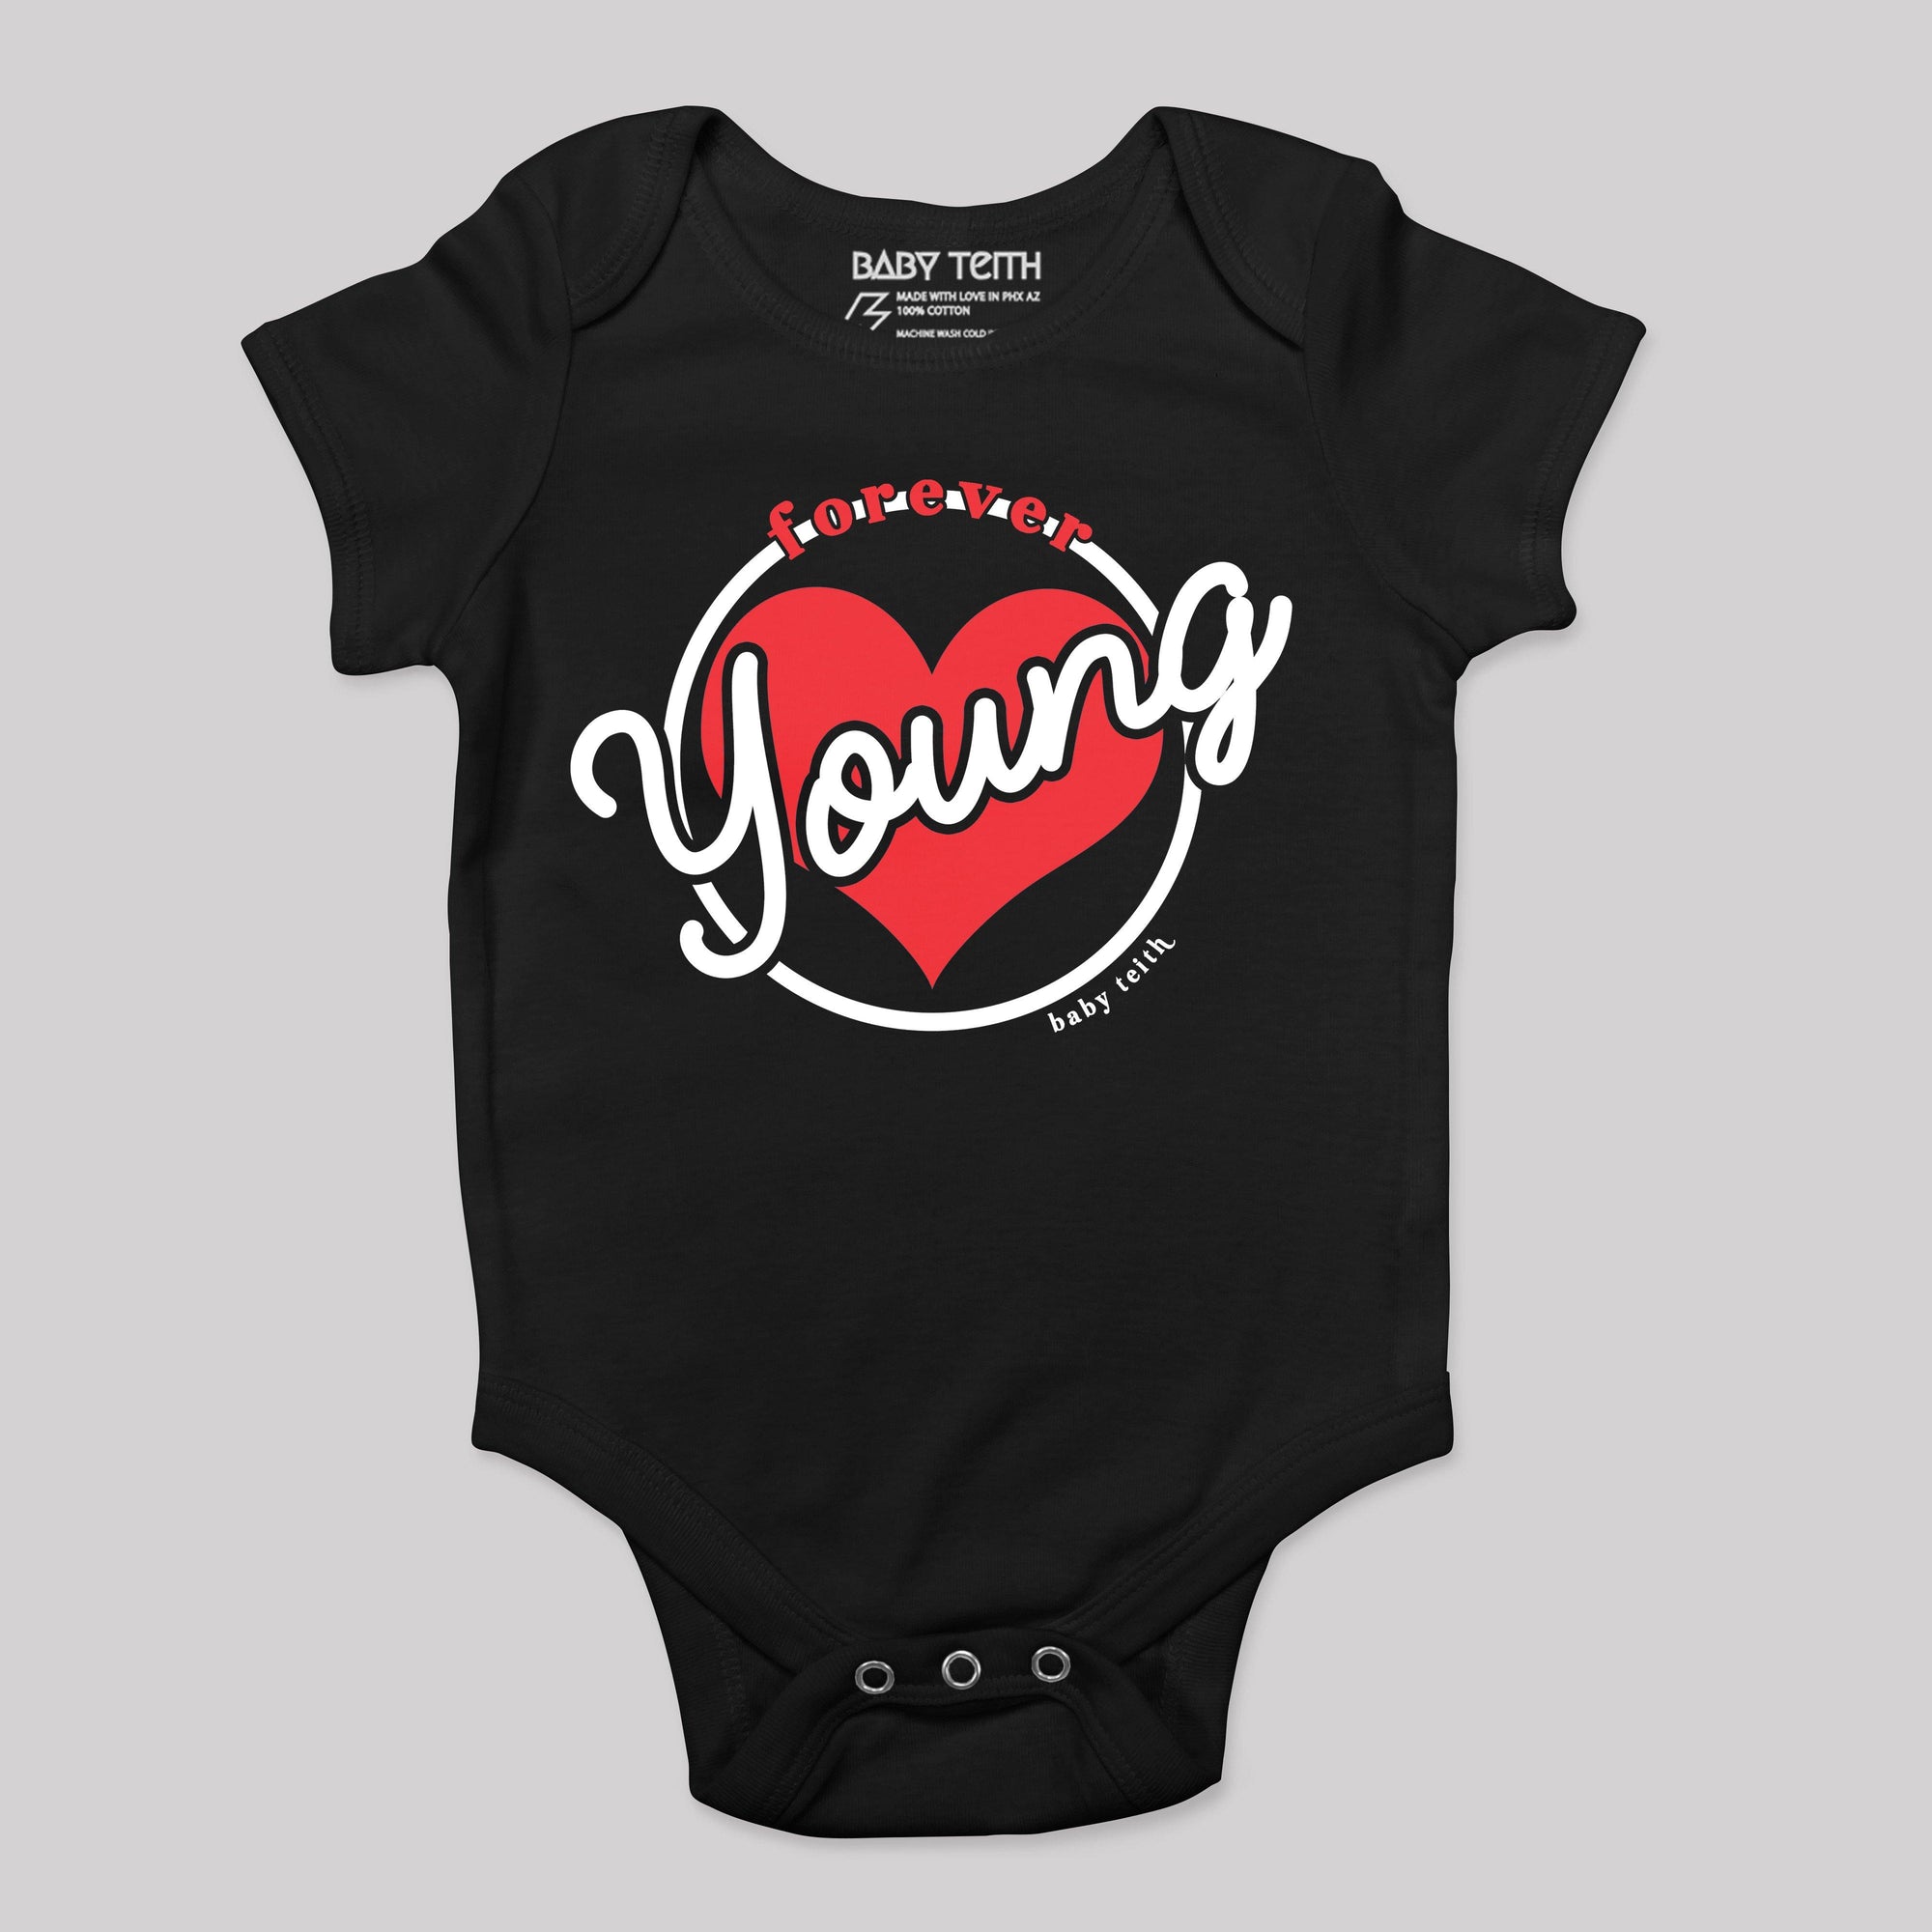 "Forever Young" Bodysuit for Babies - Baby Teith